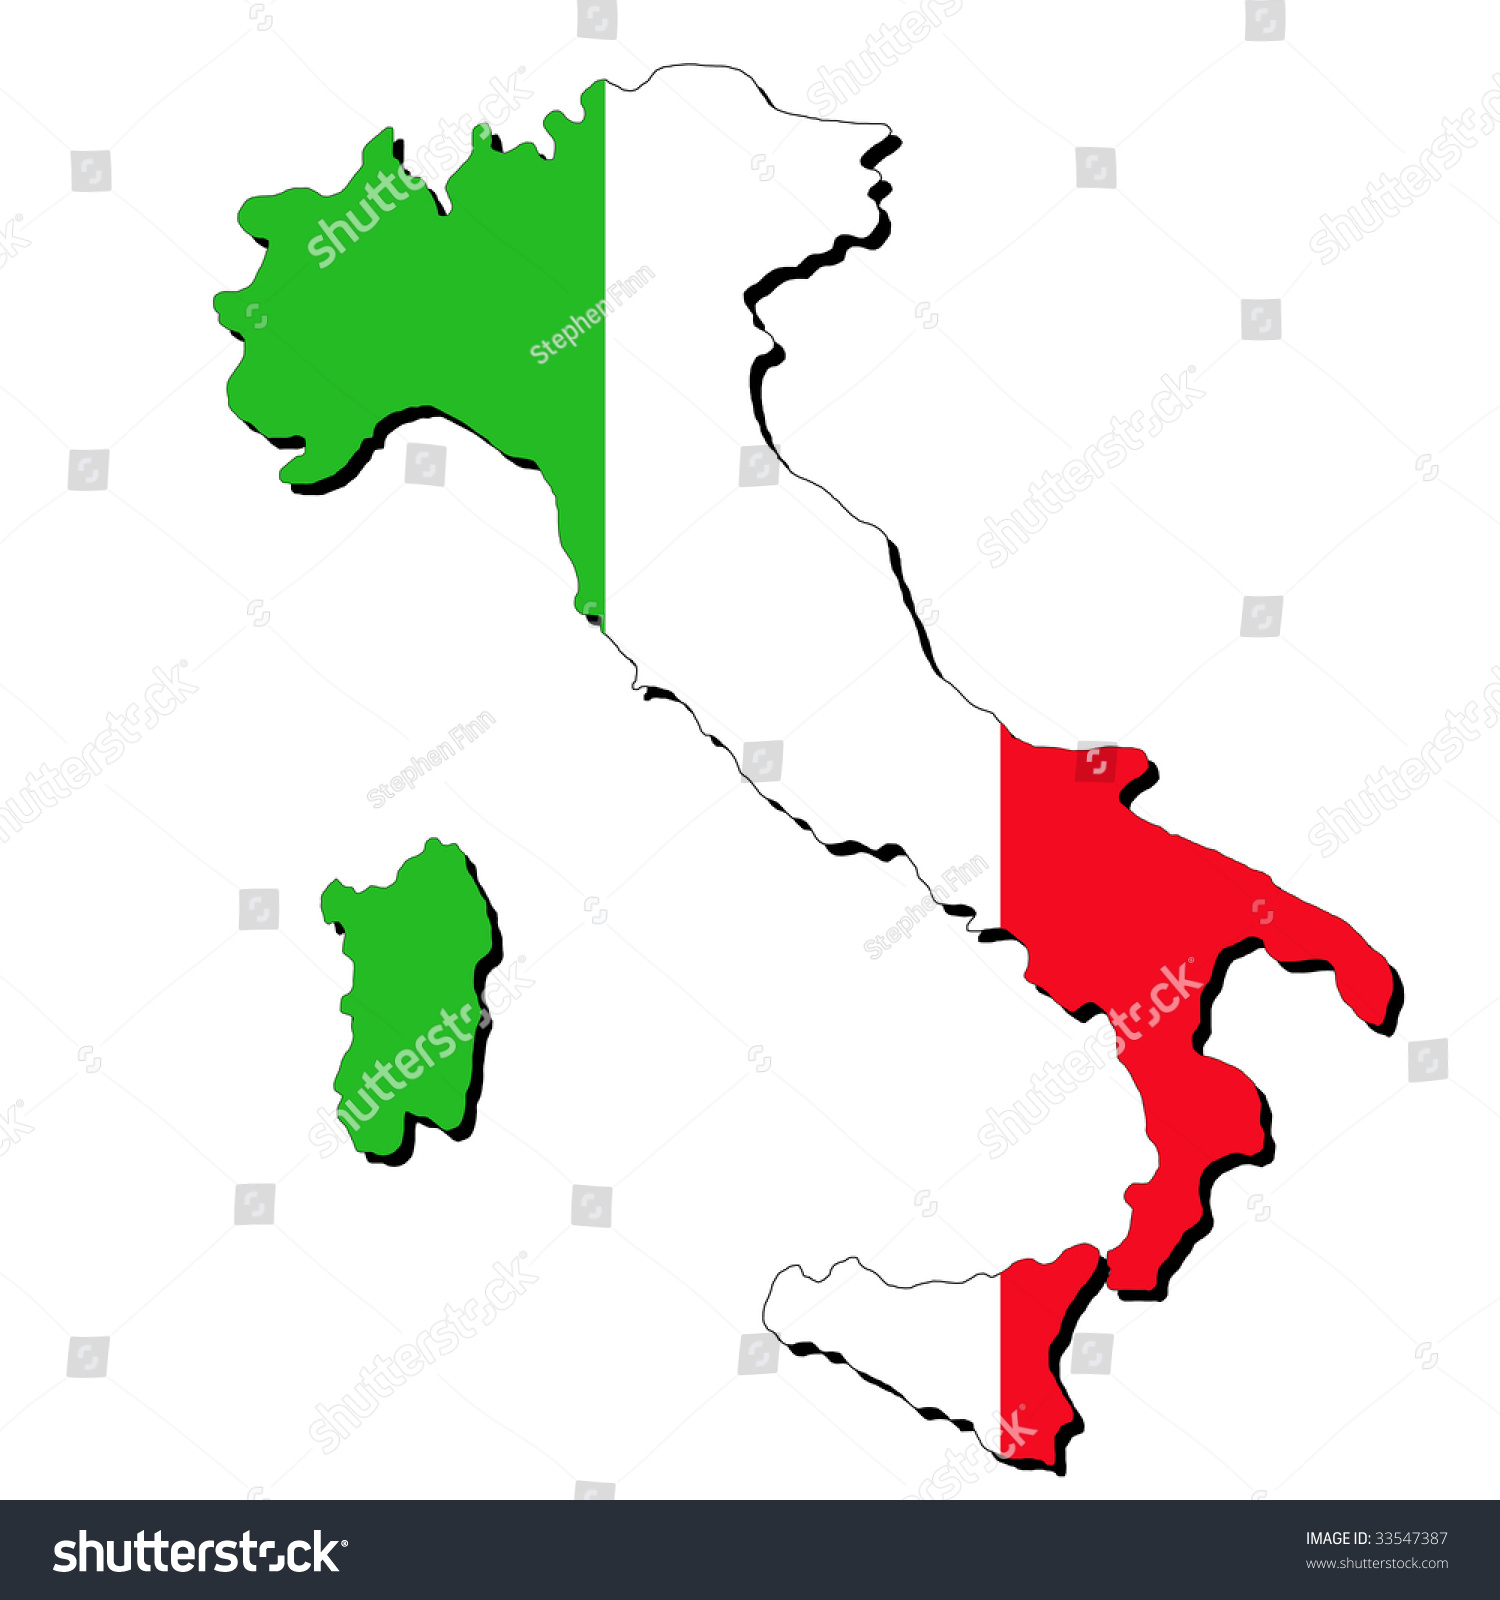 free clipart map of italy - photo #44